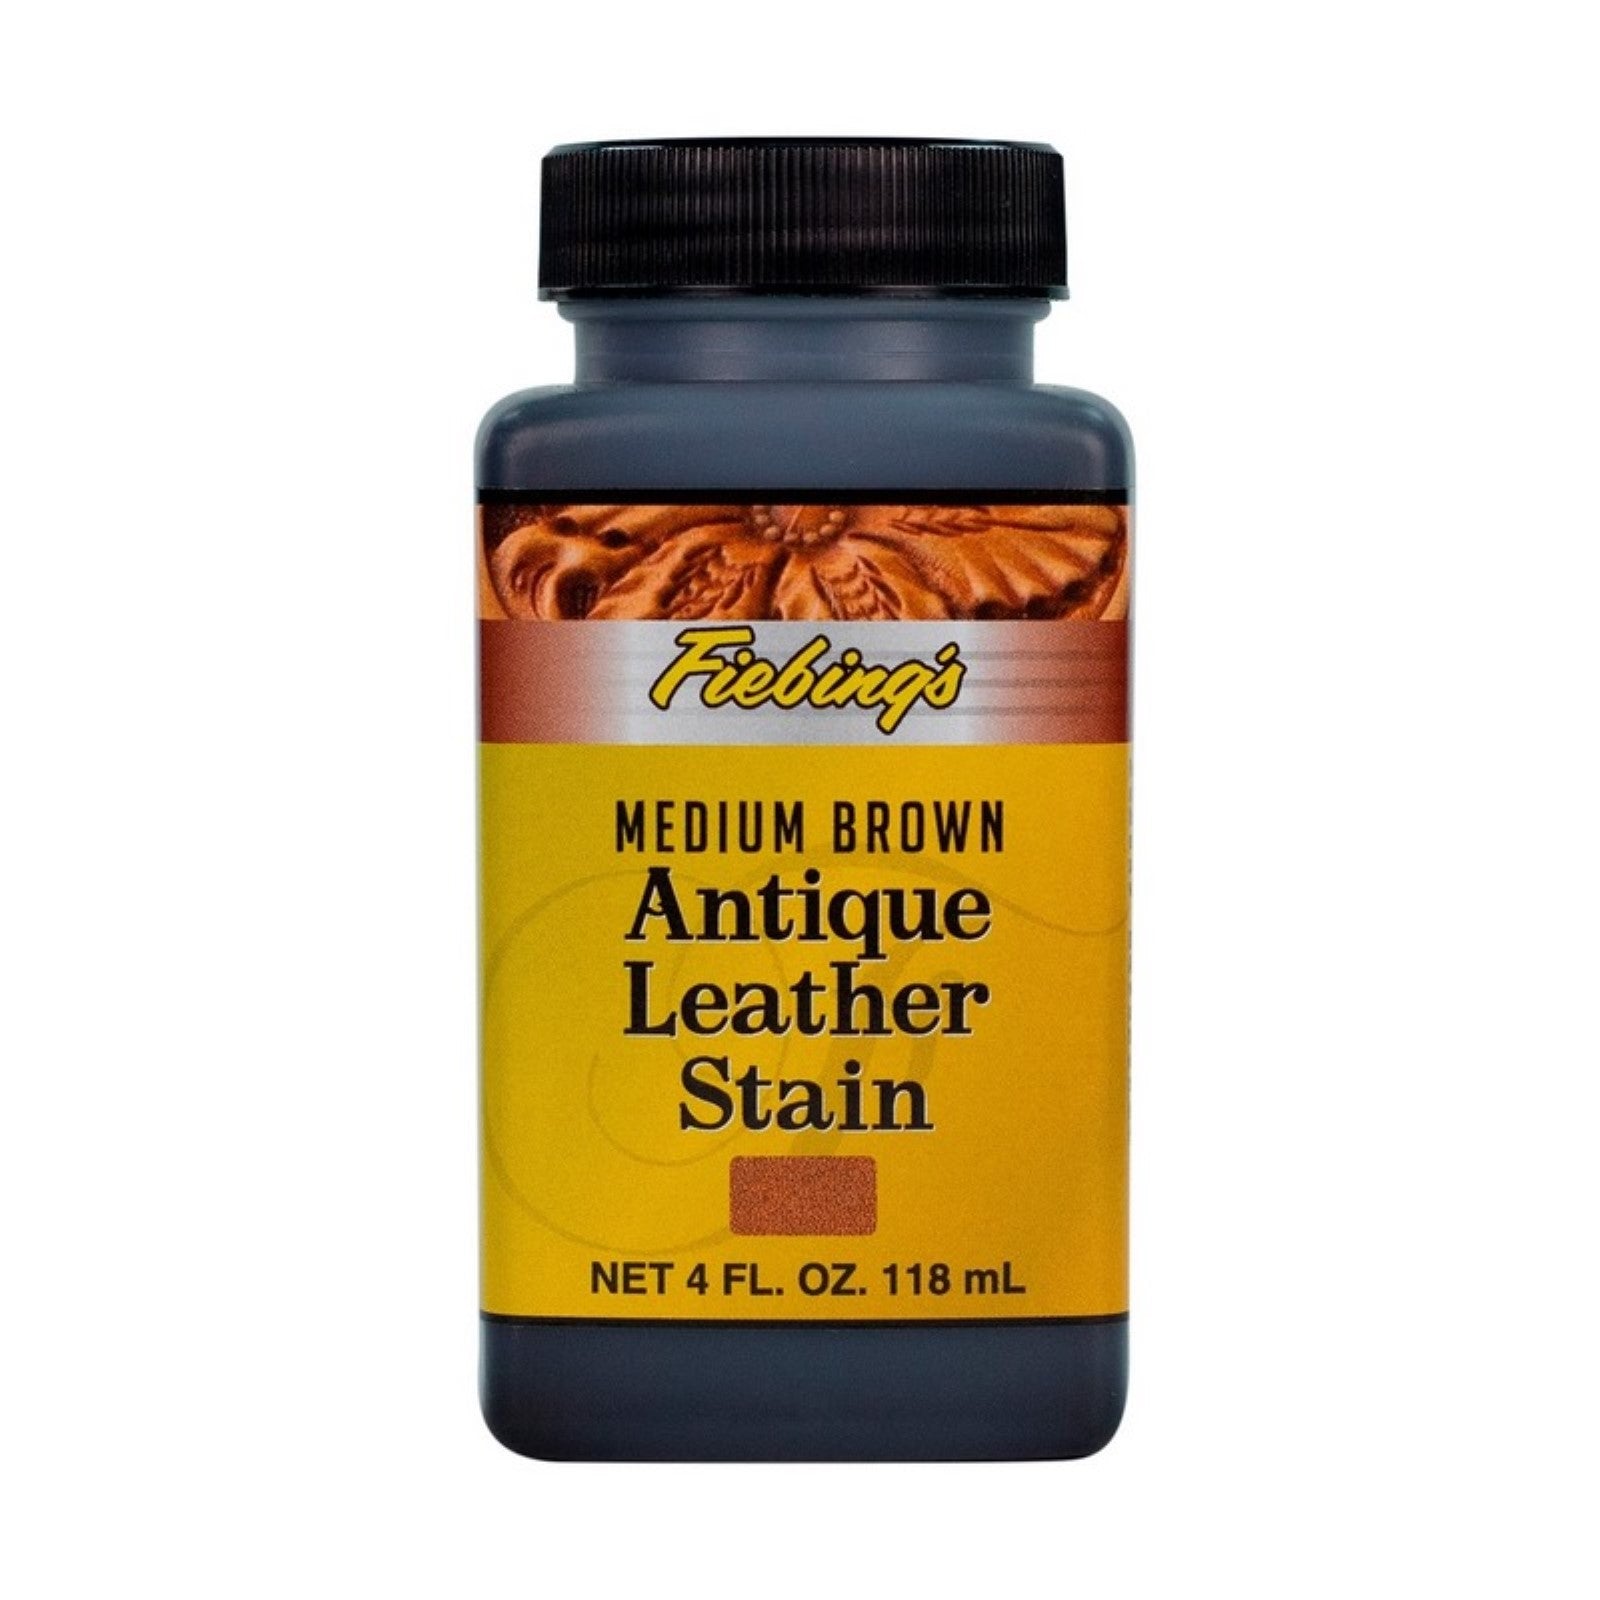 Fiebing's Antique 4 oz Leather Stains, Medium Brown | The Leather Guy